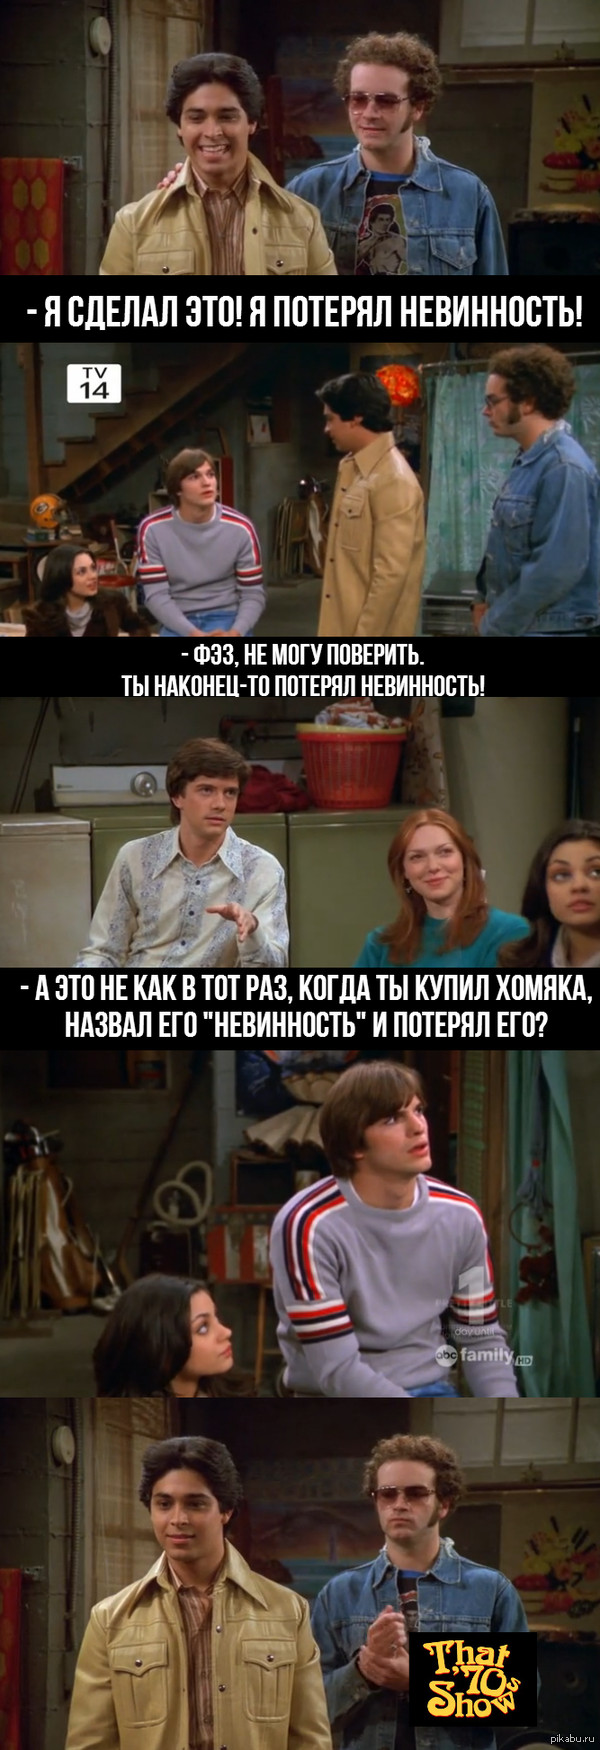   ... (That '70s Show/, ,  70-,0516,09:31)